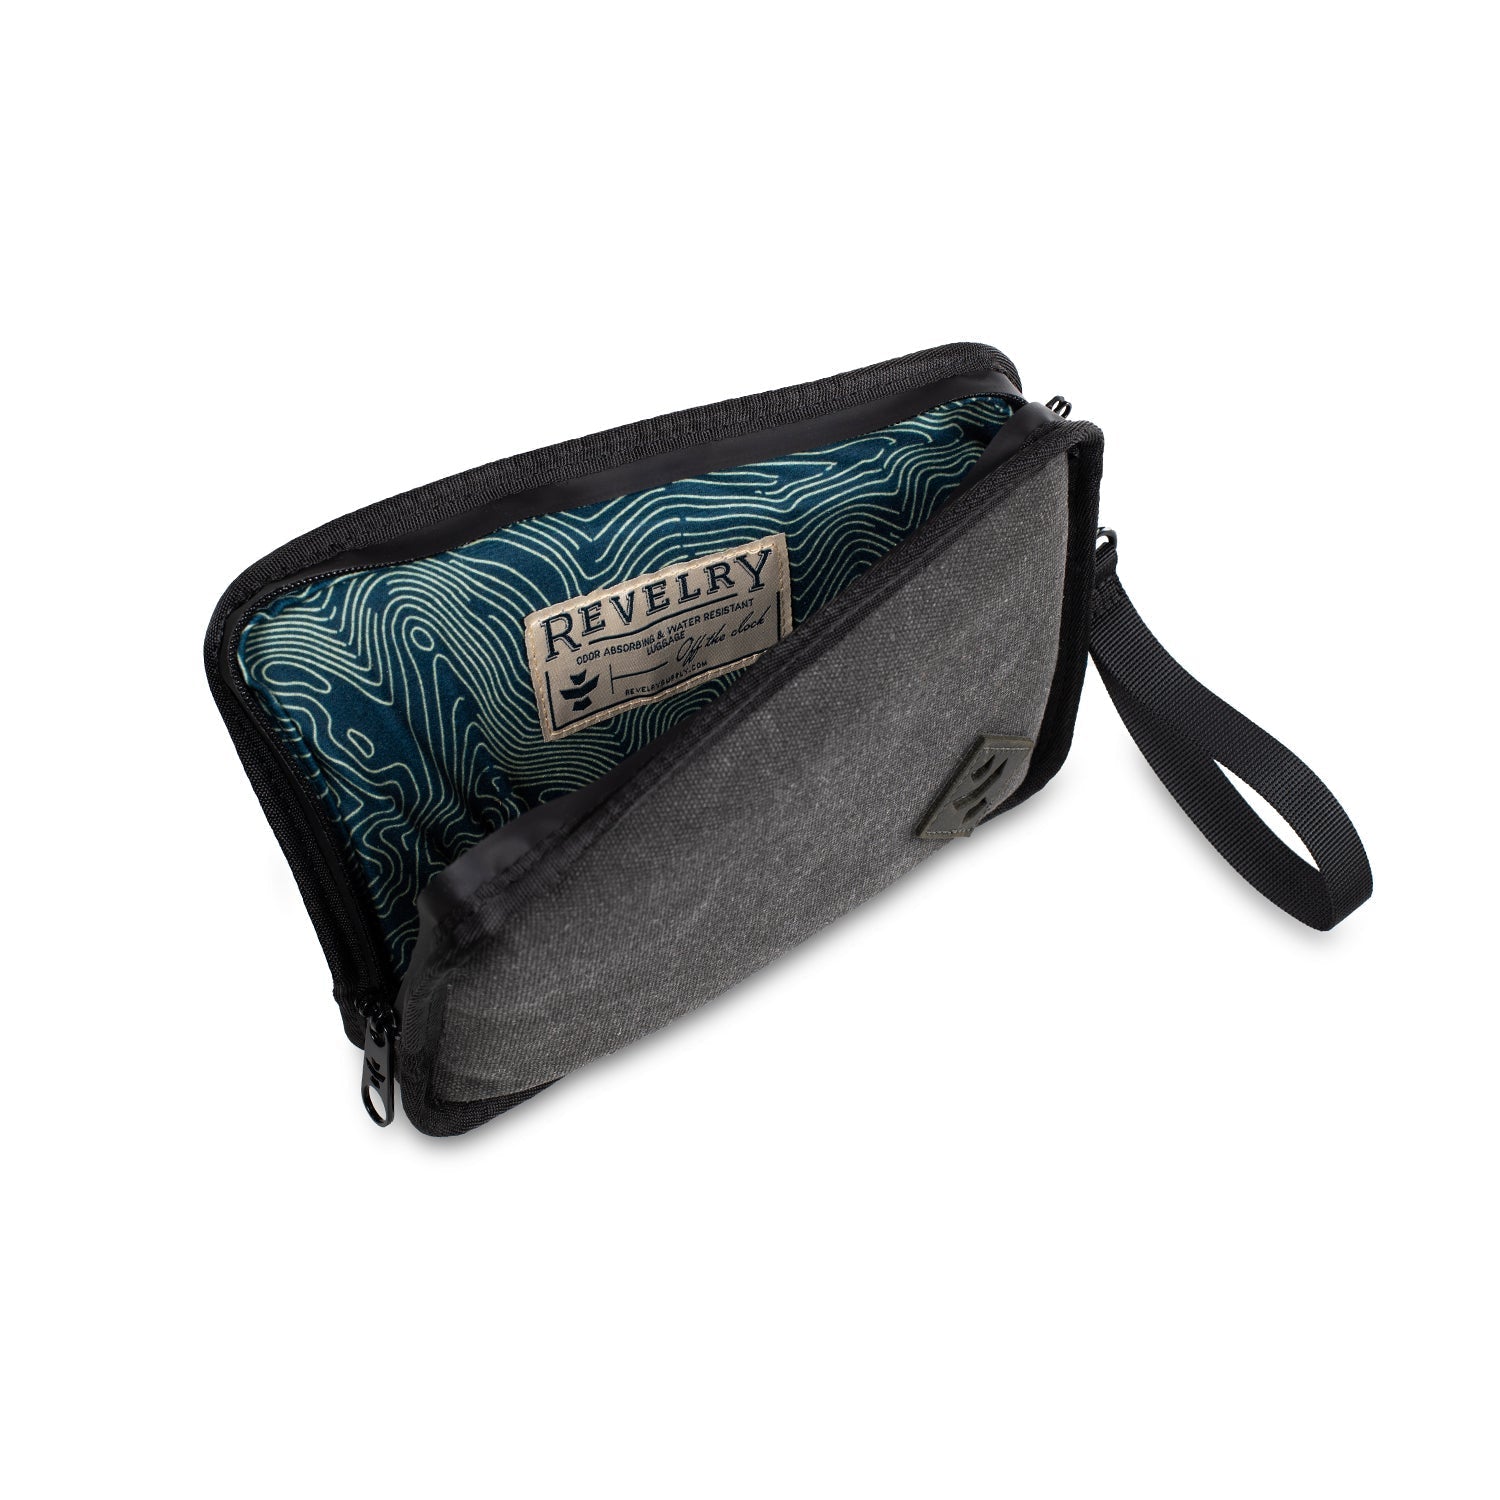 Revelry Gordo - Smell Proof Padded Pouch